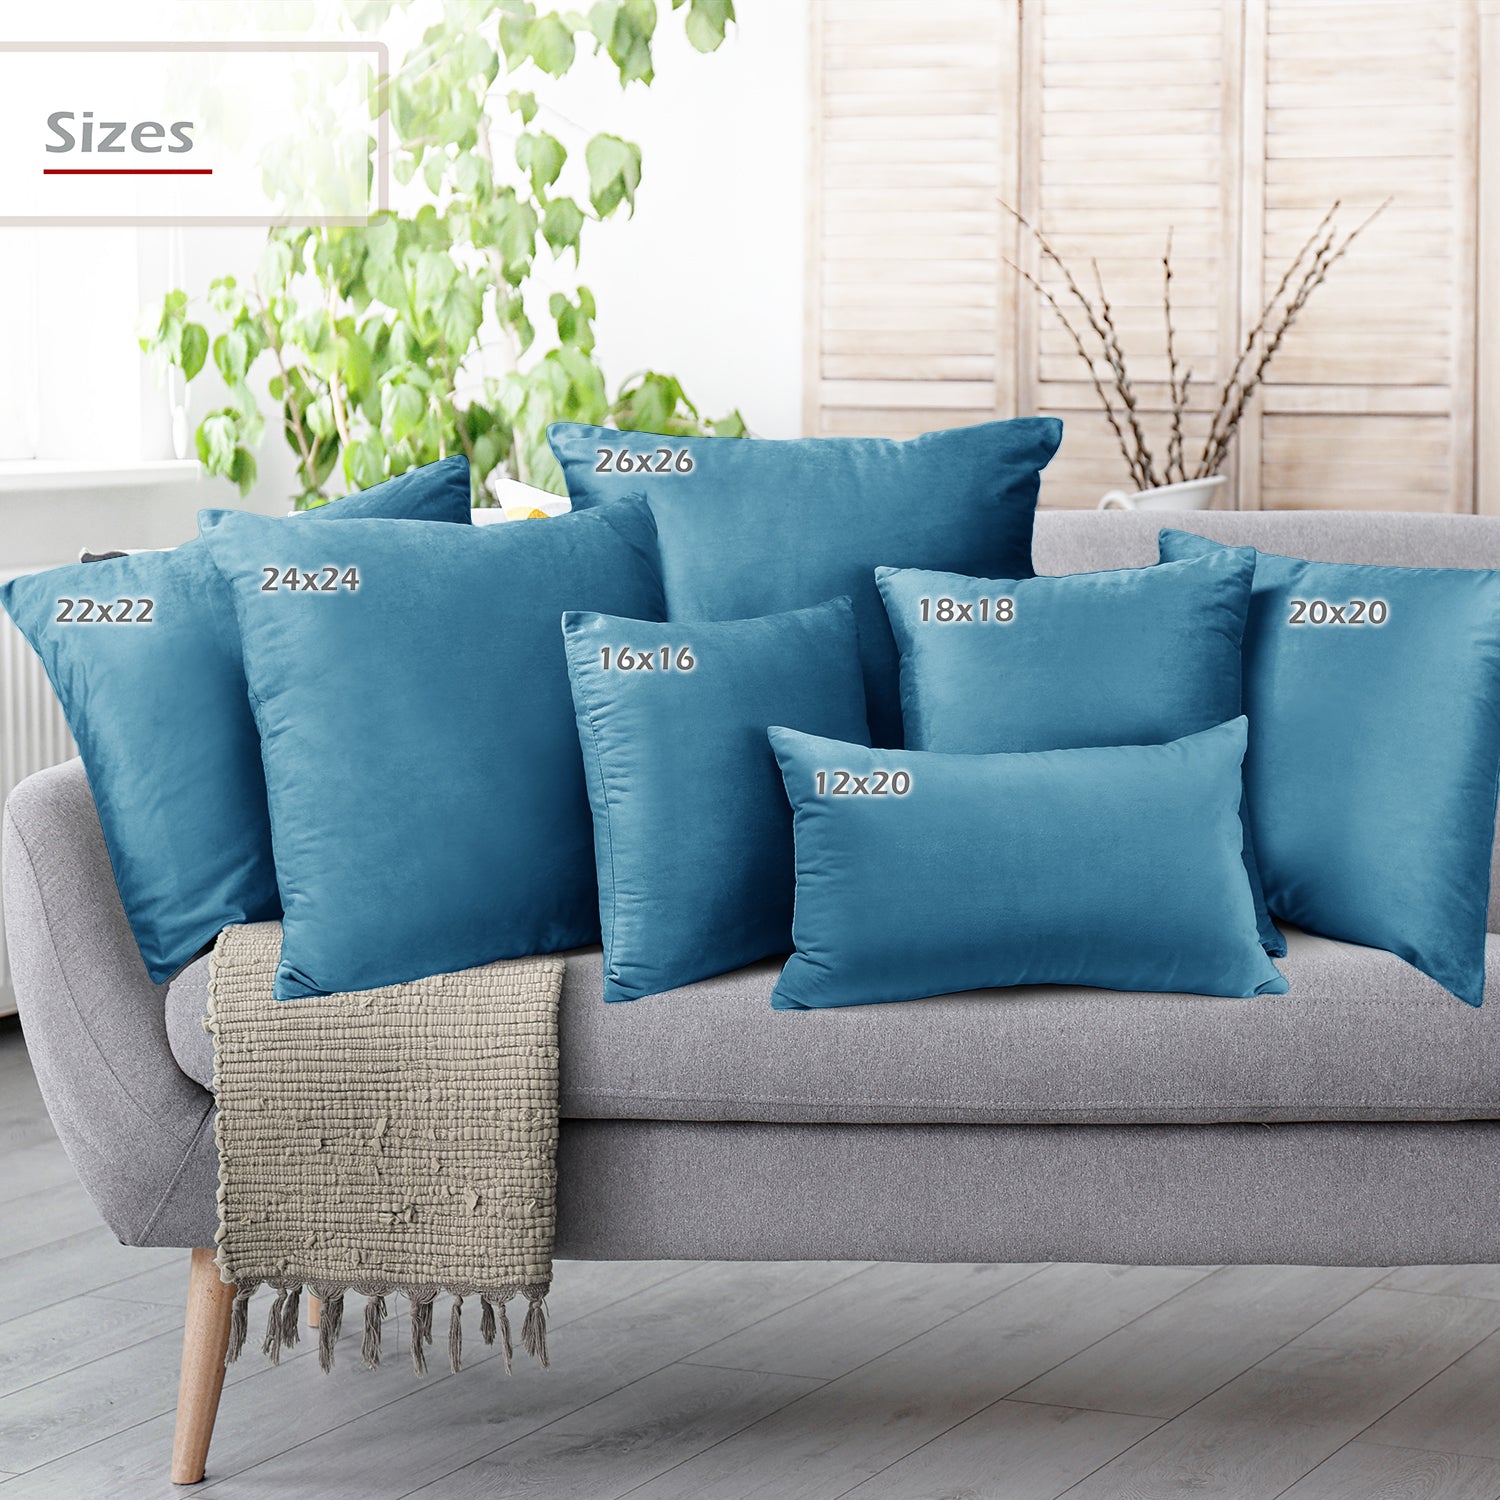 Couch Support for Sagging Cushions - 23in x 68in Sofa Cushion